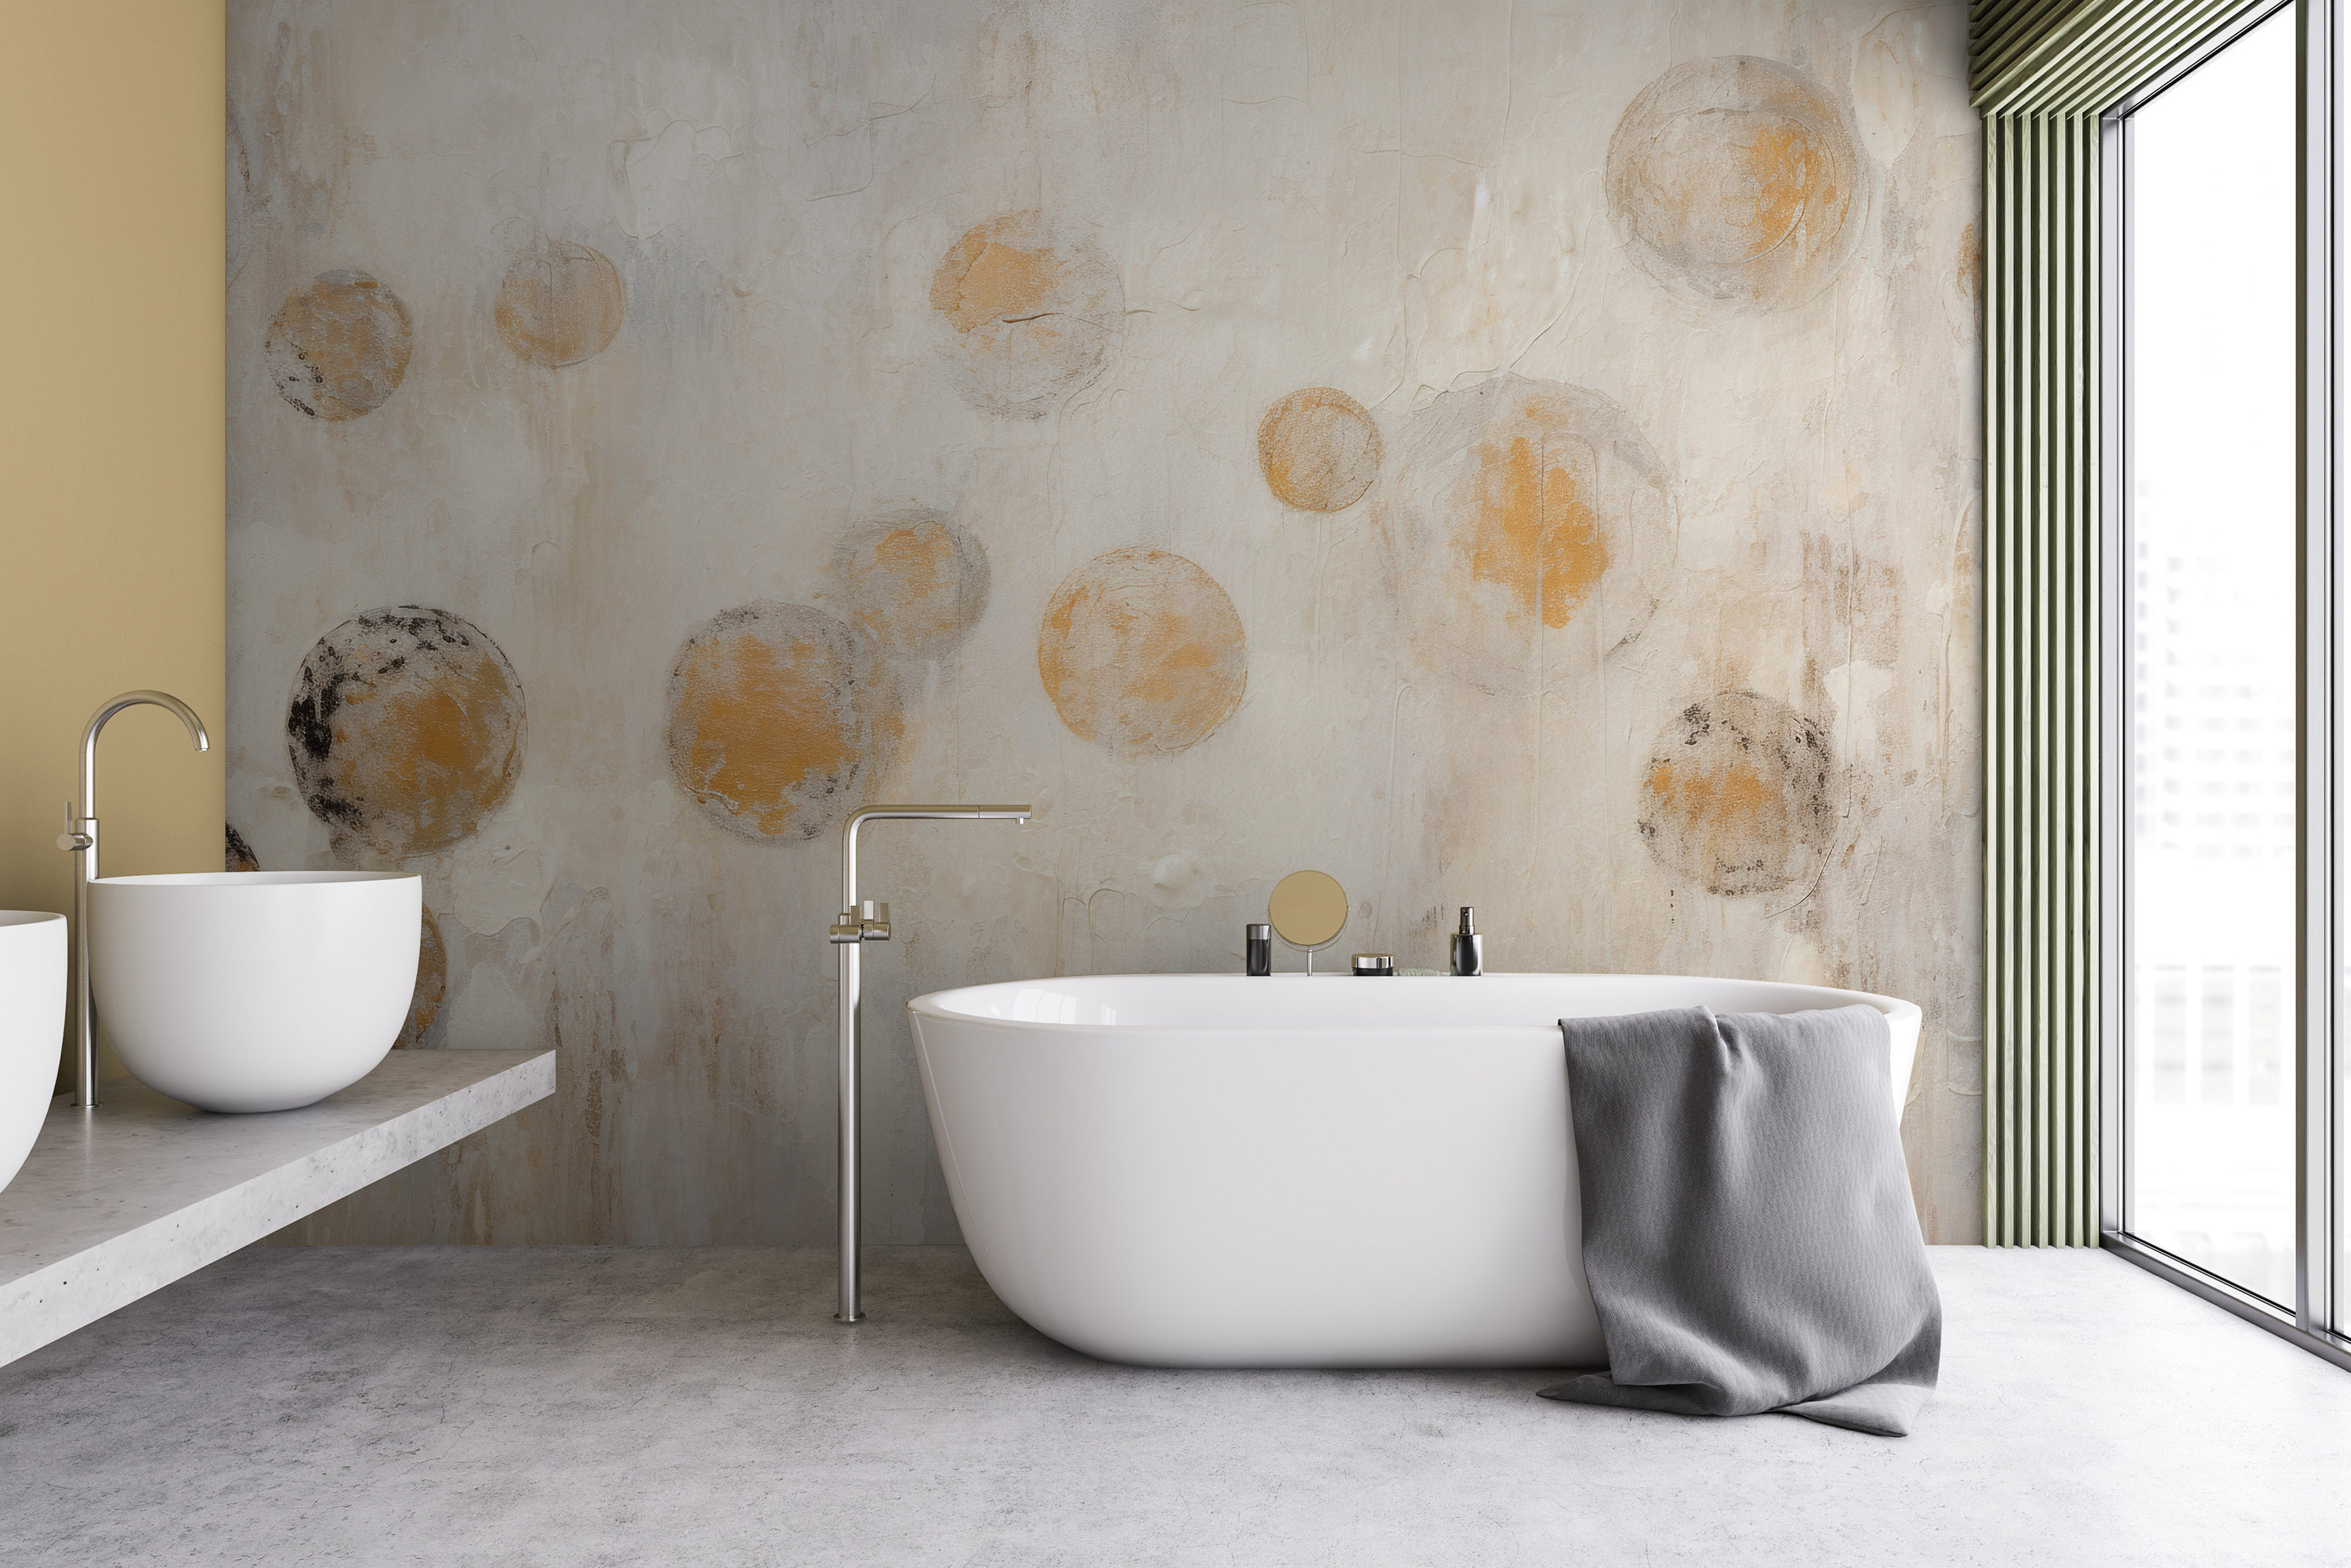 This mural captures the delicate dance of ethereal spheres in earthy tones floating on a cream canvas. The speckled textures and soft edges of the wheels create a dreamlike mood, while the neutral background evokes a feeling of calm. This work adds subtle elegance to any space, encouraging contemplation and silence.